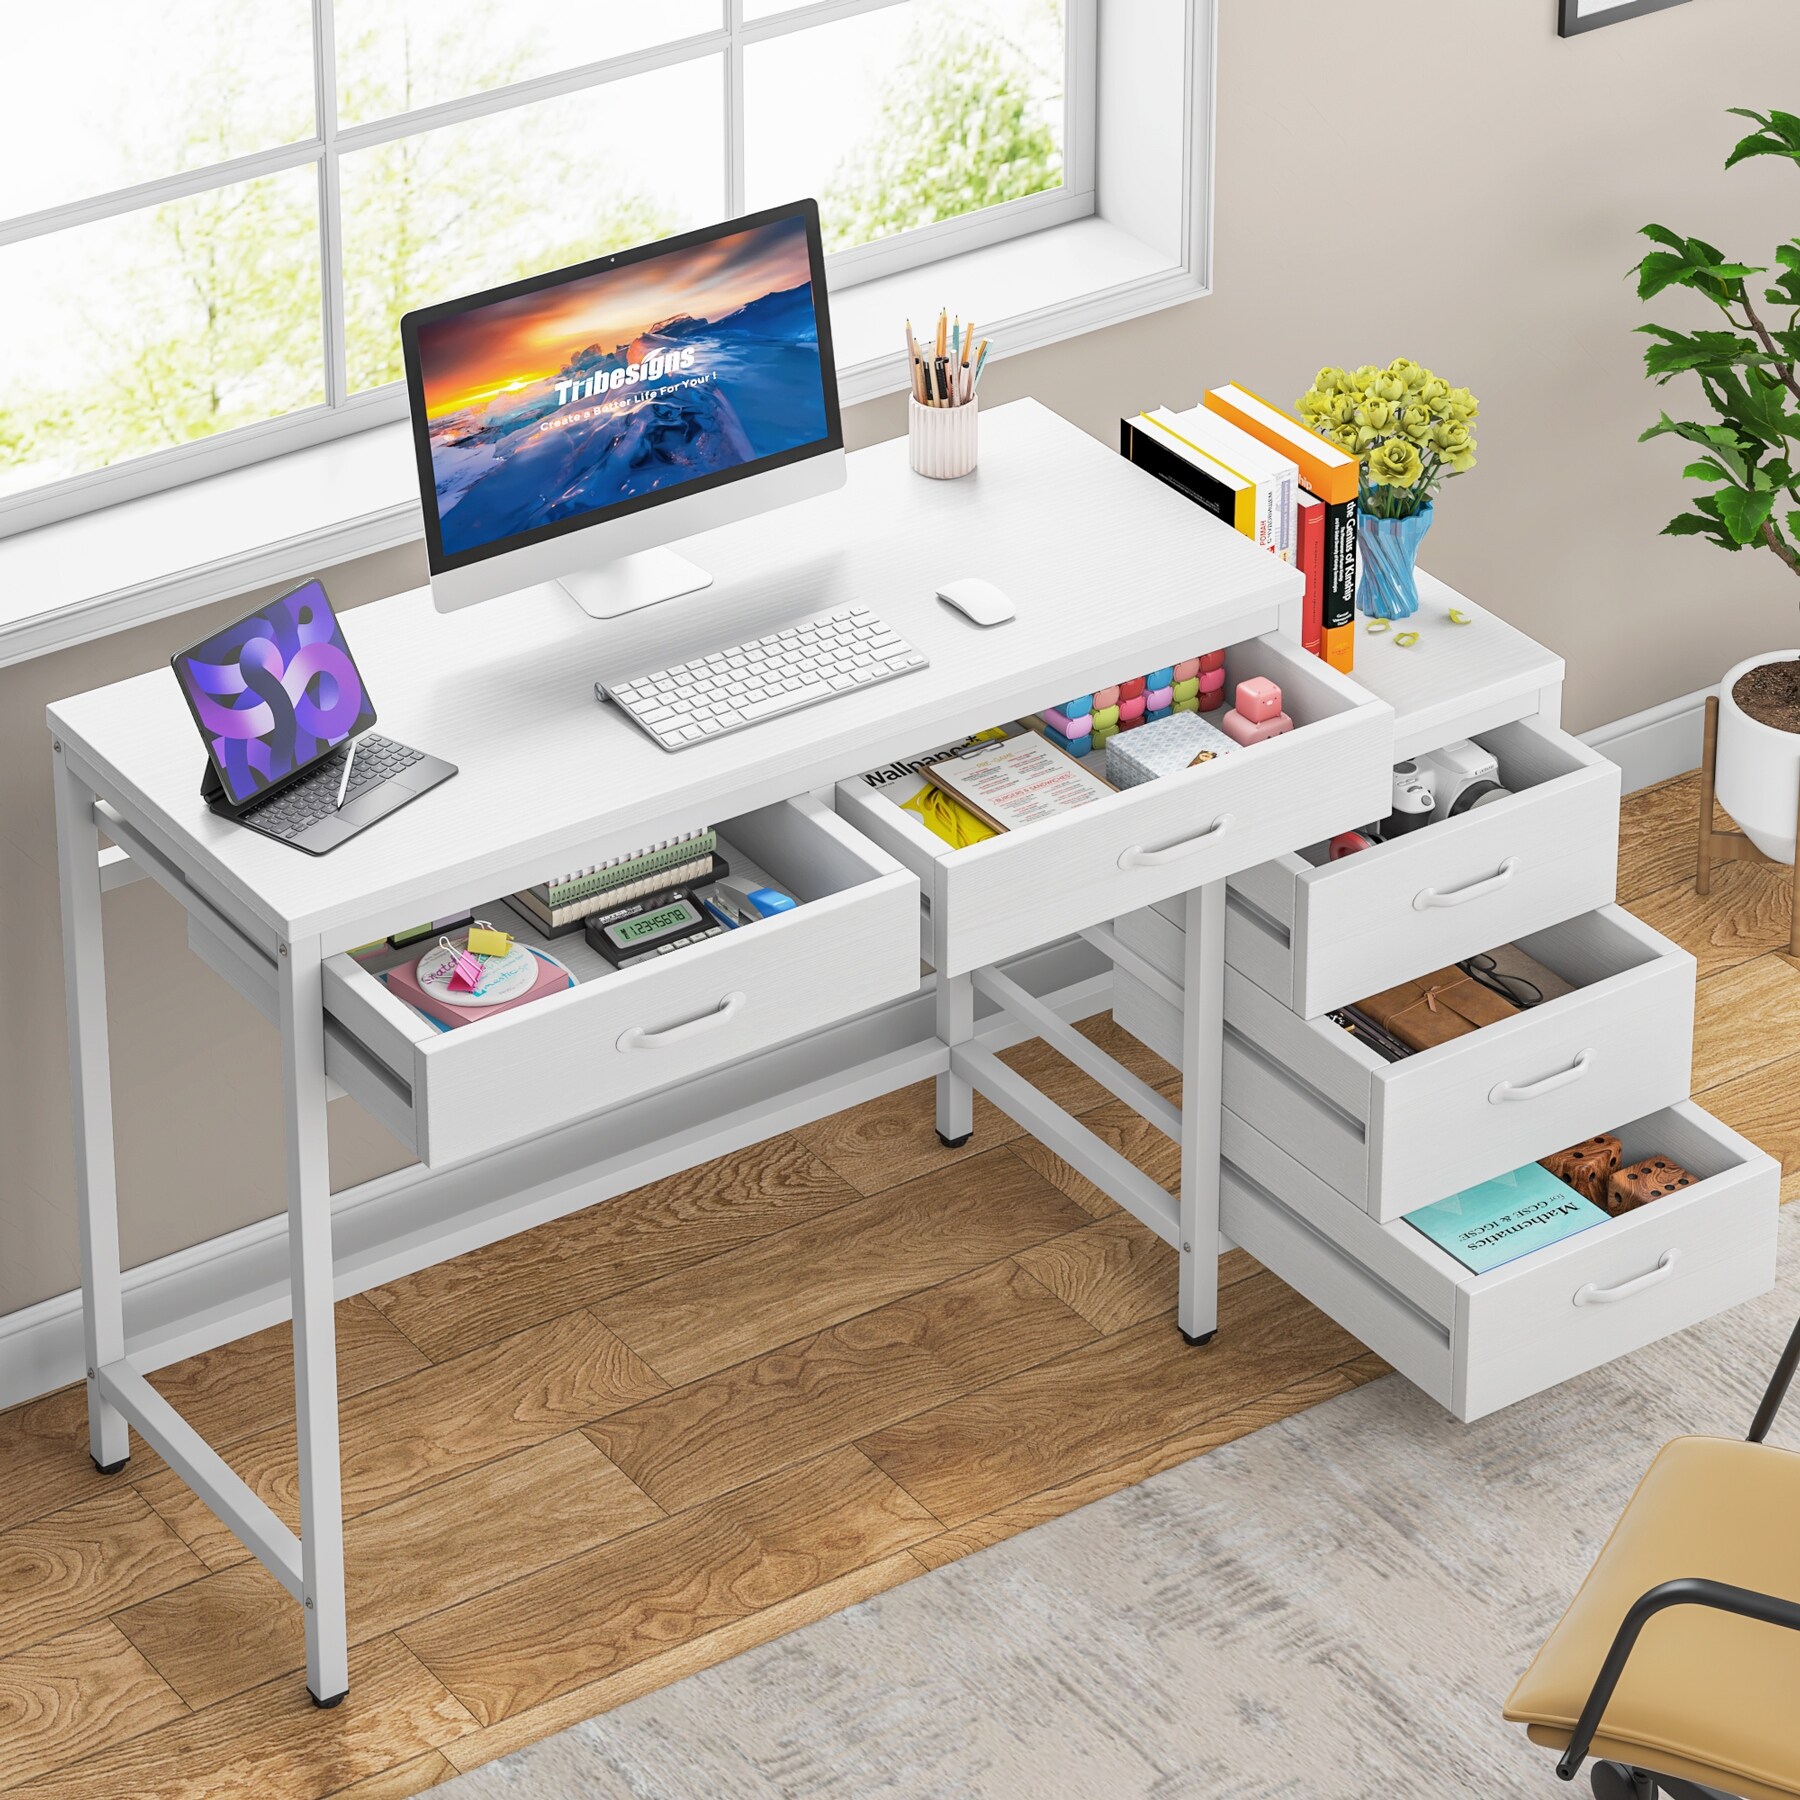 https://ak1.ostkcdn.com/images/products/is/images/direct/12f85ae82a77d75e3a1d0b07ce949091fe12807c/Reversible-Computer-Desk-with-5-Drawers%2C-Home-Office-Desk-with-File-Cabinet-Drawer-Printer-Stand.jpg